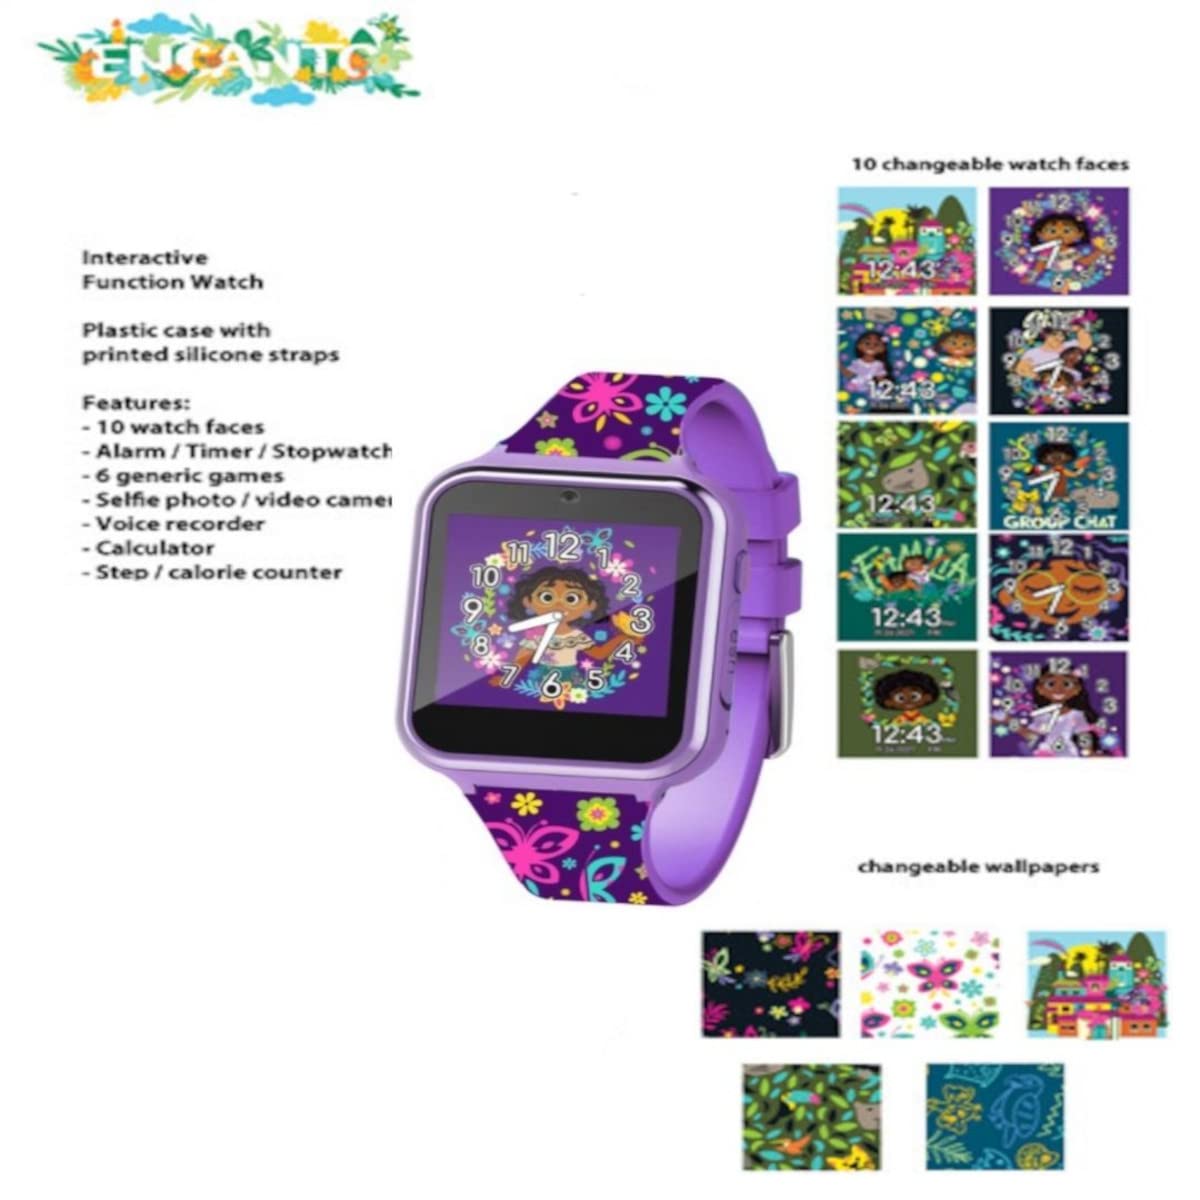 Accutime Disney Encanto Kids Smart Watch for Girls & Boys - Interactive Smartwatch with Selfie Camera, Games, Voice & Video Recorder, Pedometer, Calculator, Alarm, USB Charger